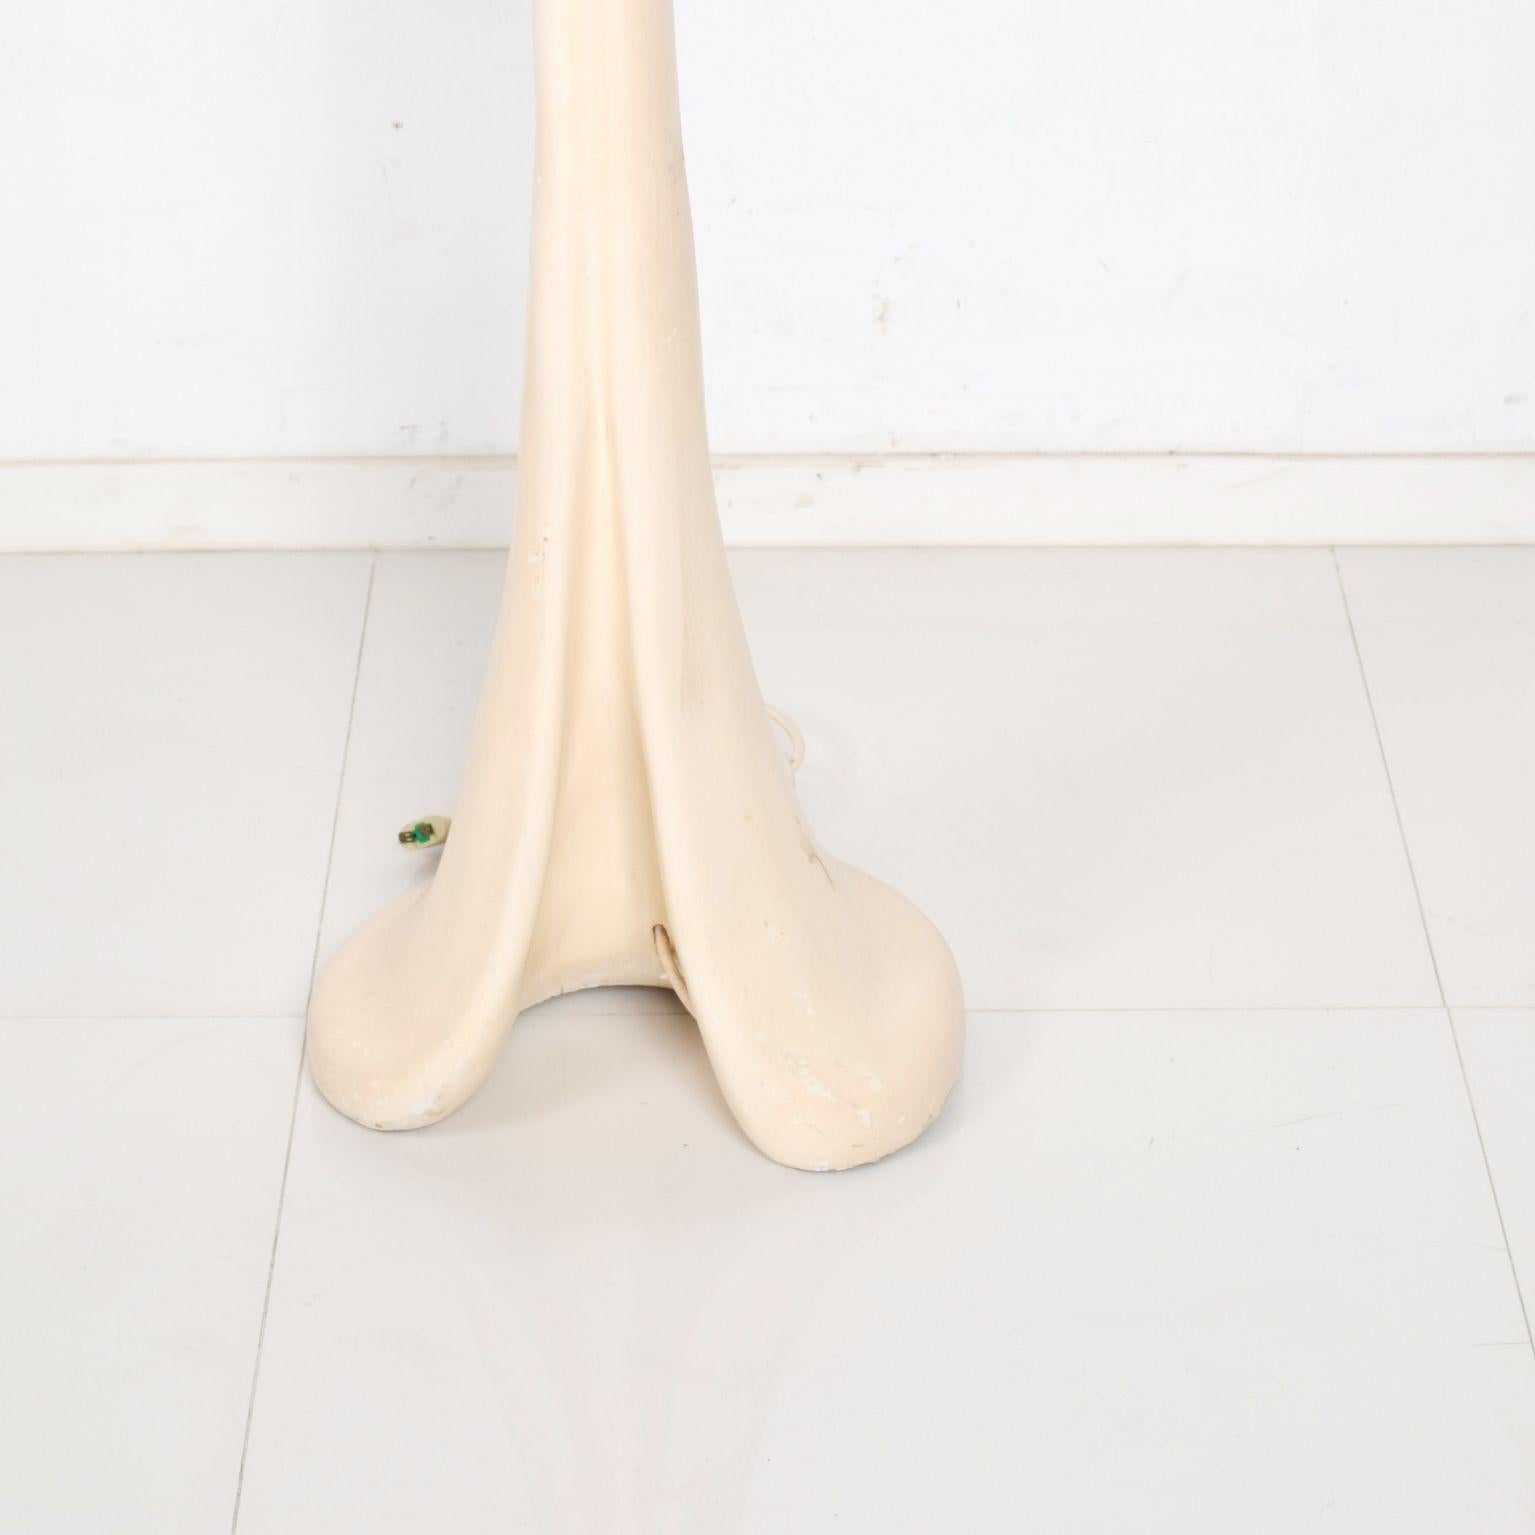 For your consideration an elegant torchiere floor lamp in the style of Serge Roche, Hollywood Regency France 1960s.

Fiberglass and plaster in sumptuous ivory. Beautiful sculptural shape. Unmarked.

Dimensions: H 72 in. x W 20 in. x D 21